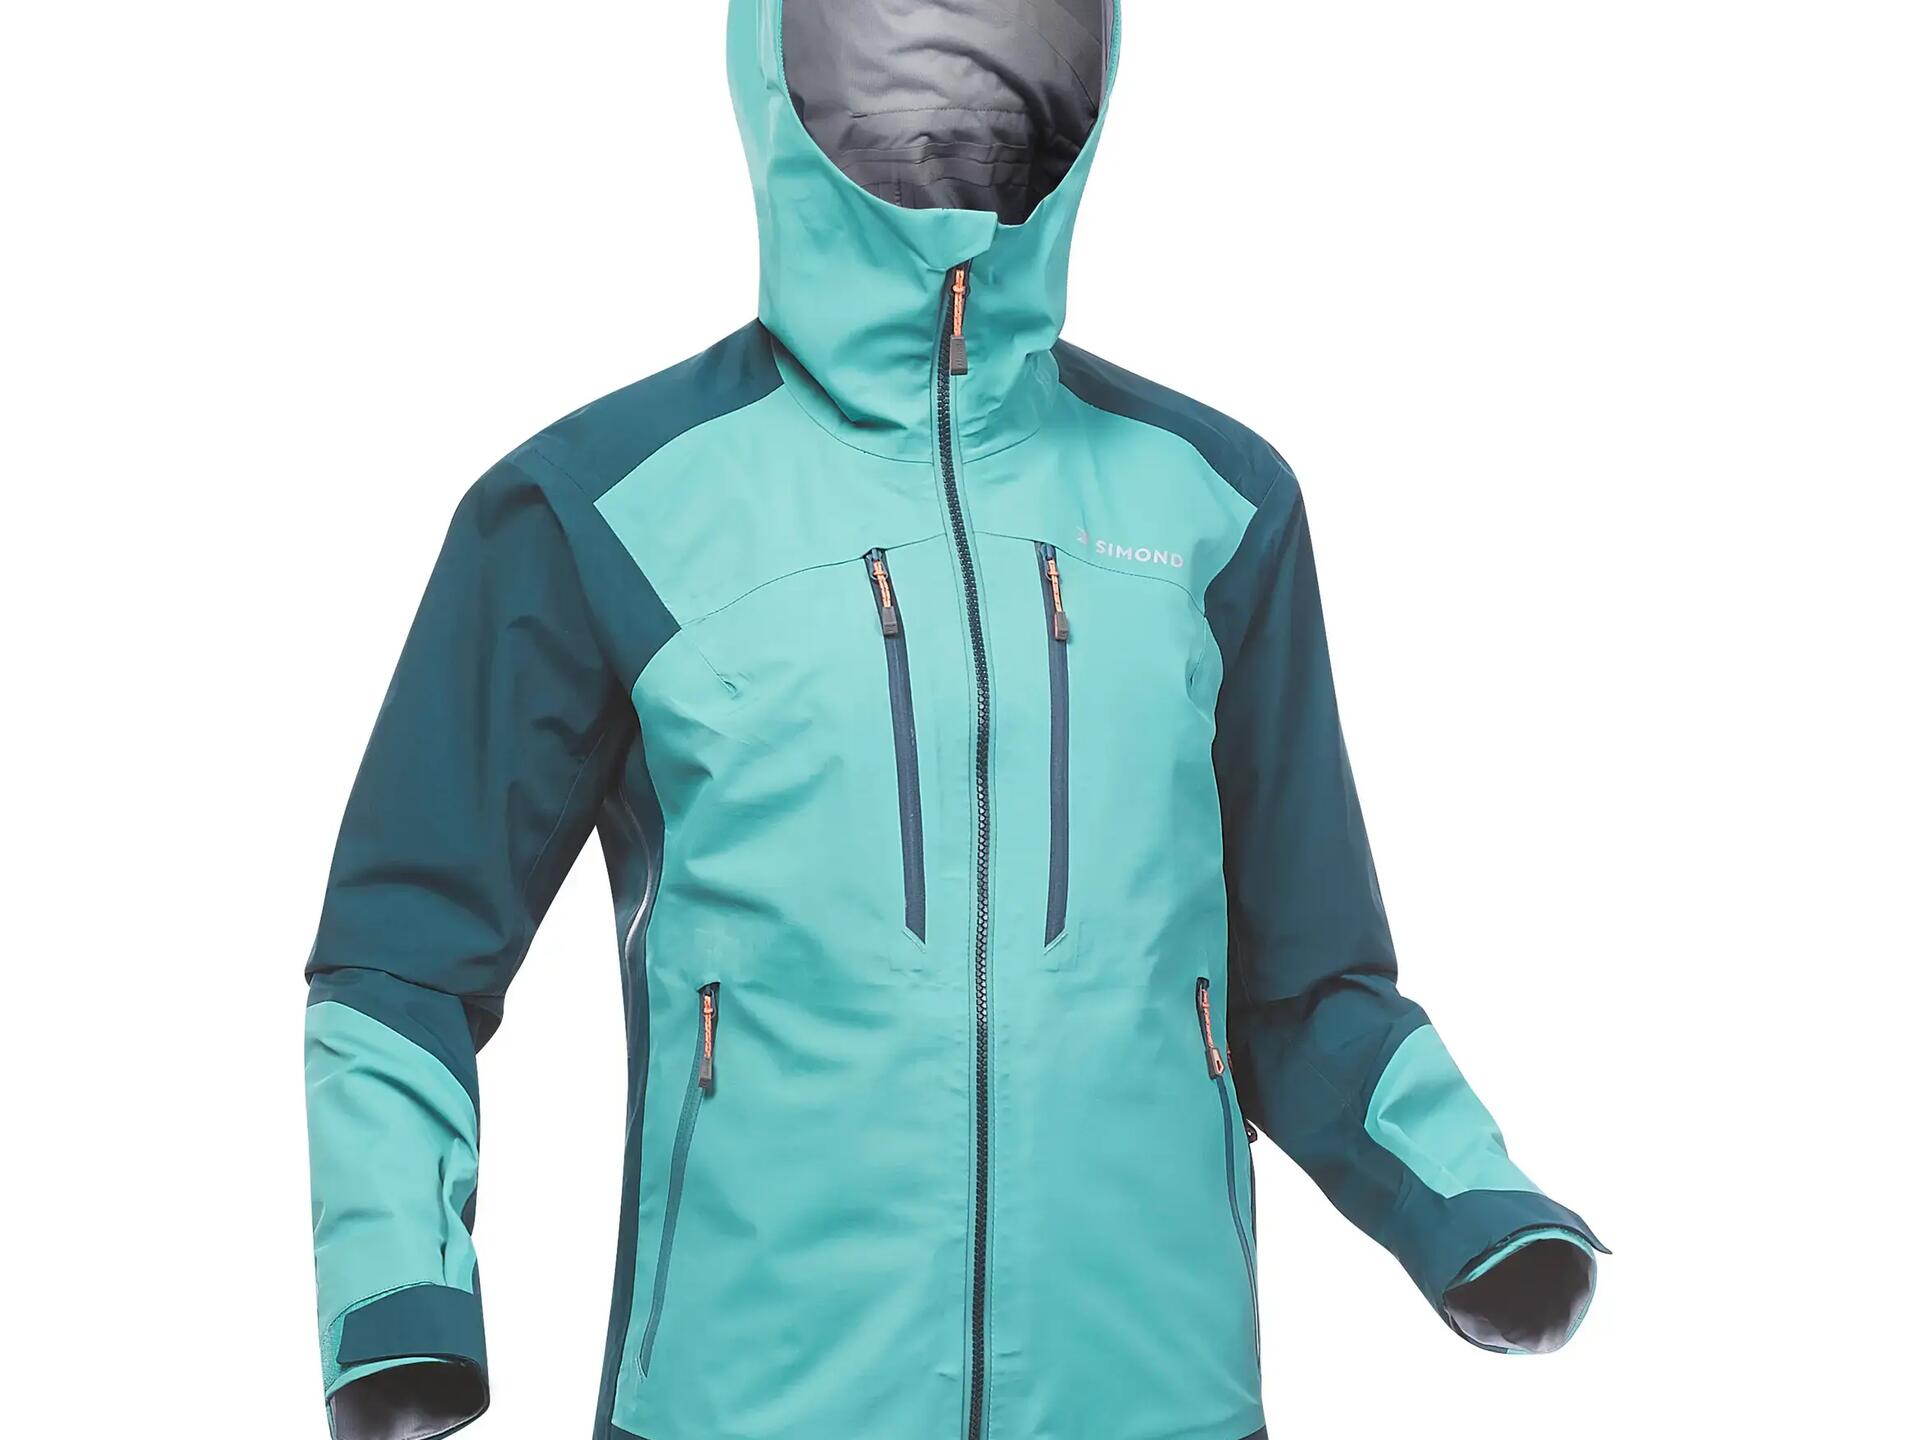 performance pack - mixed-terrain mountaineering - winter 